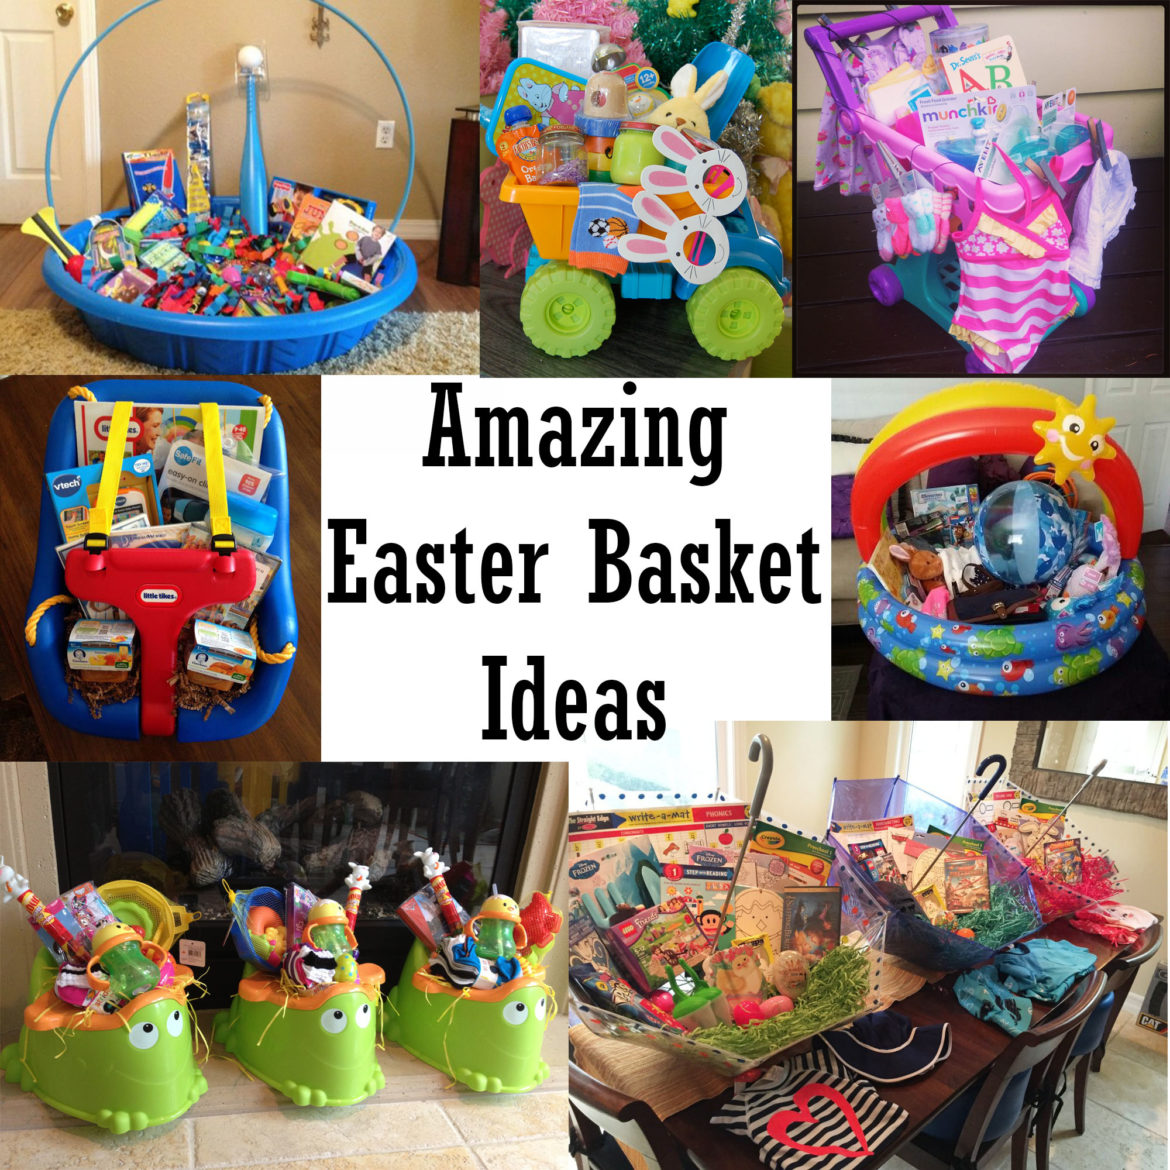 Amazing Easter Basket Ideas - The Keeper of the Cheerios